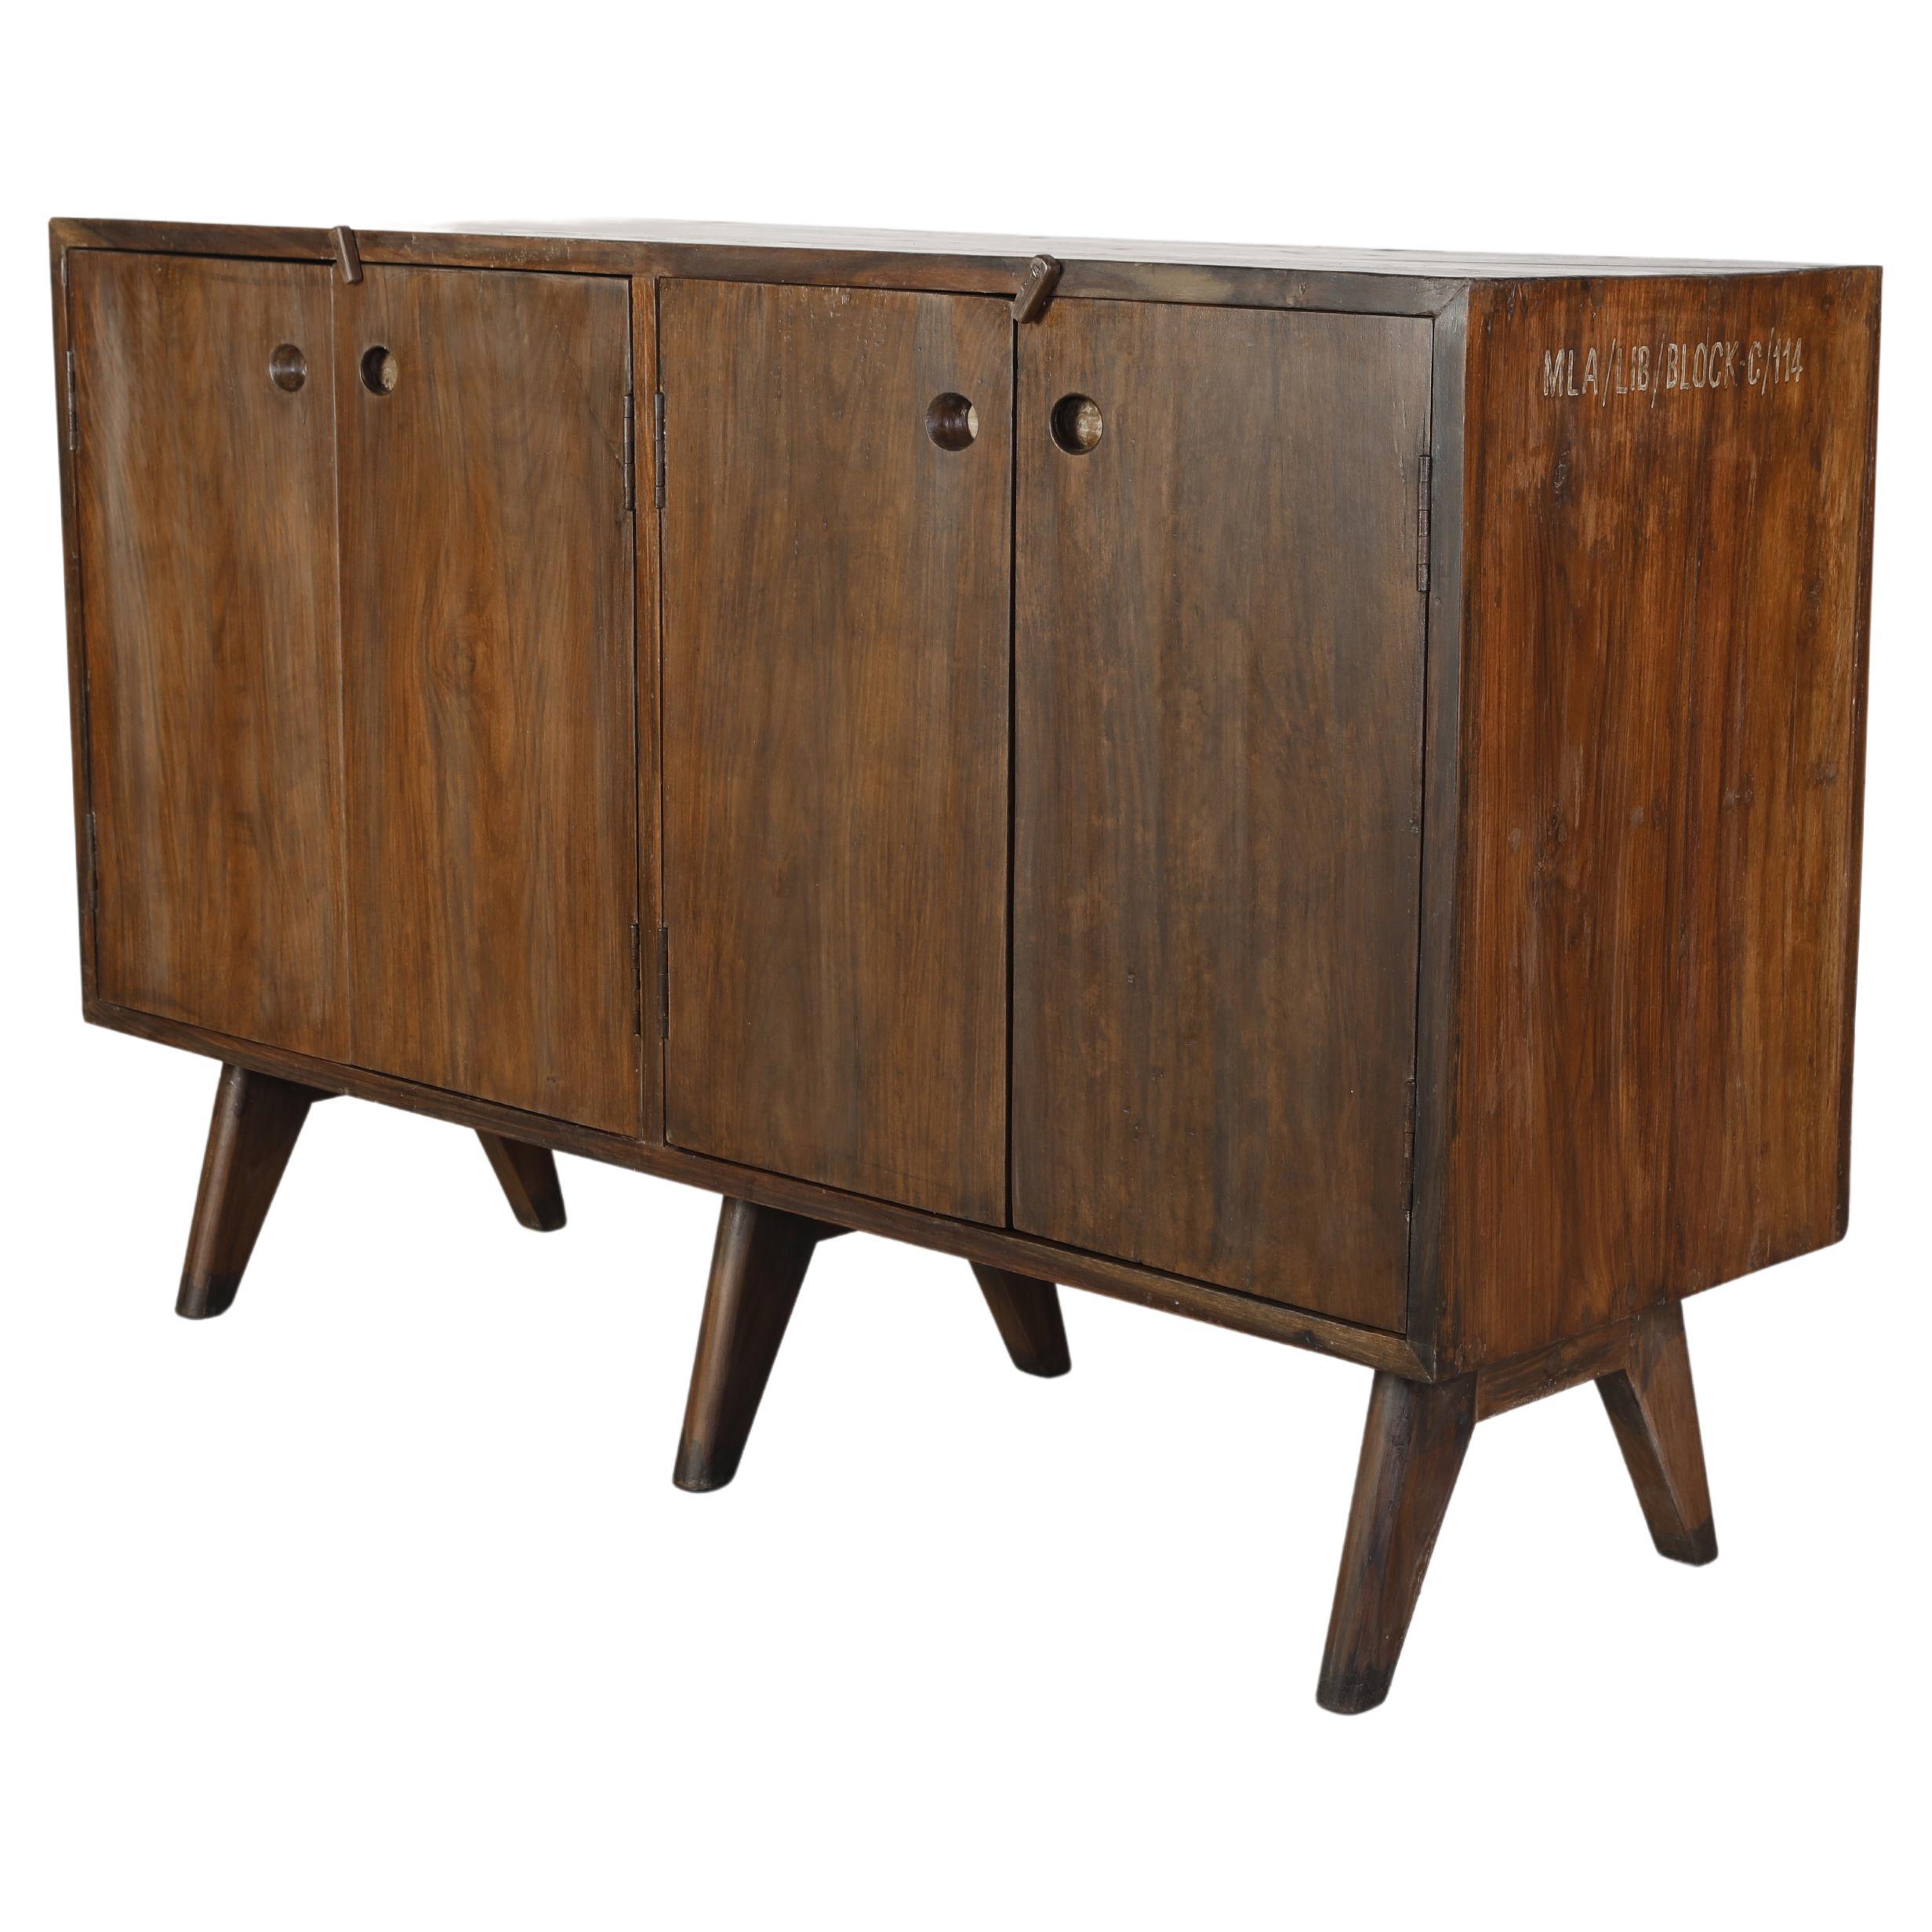 This cupboard is a fantastic piece of solid yet elegant furniture. It is raw in its simplicity of construction, its shape becomes reduced to a maximum of functionality. The characteristic legs, combined with the warmth of the solid teak wood make it